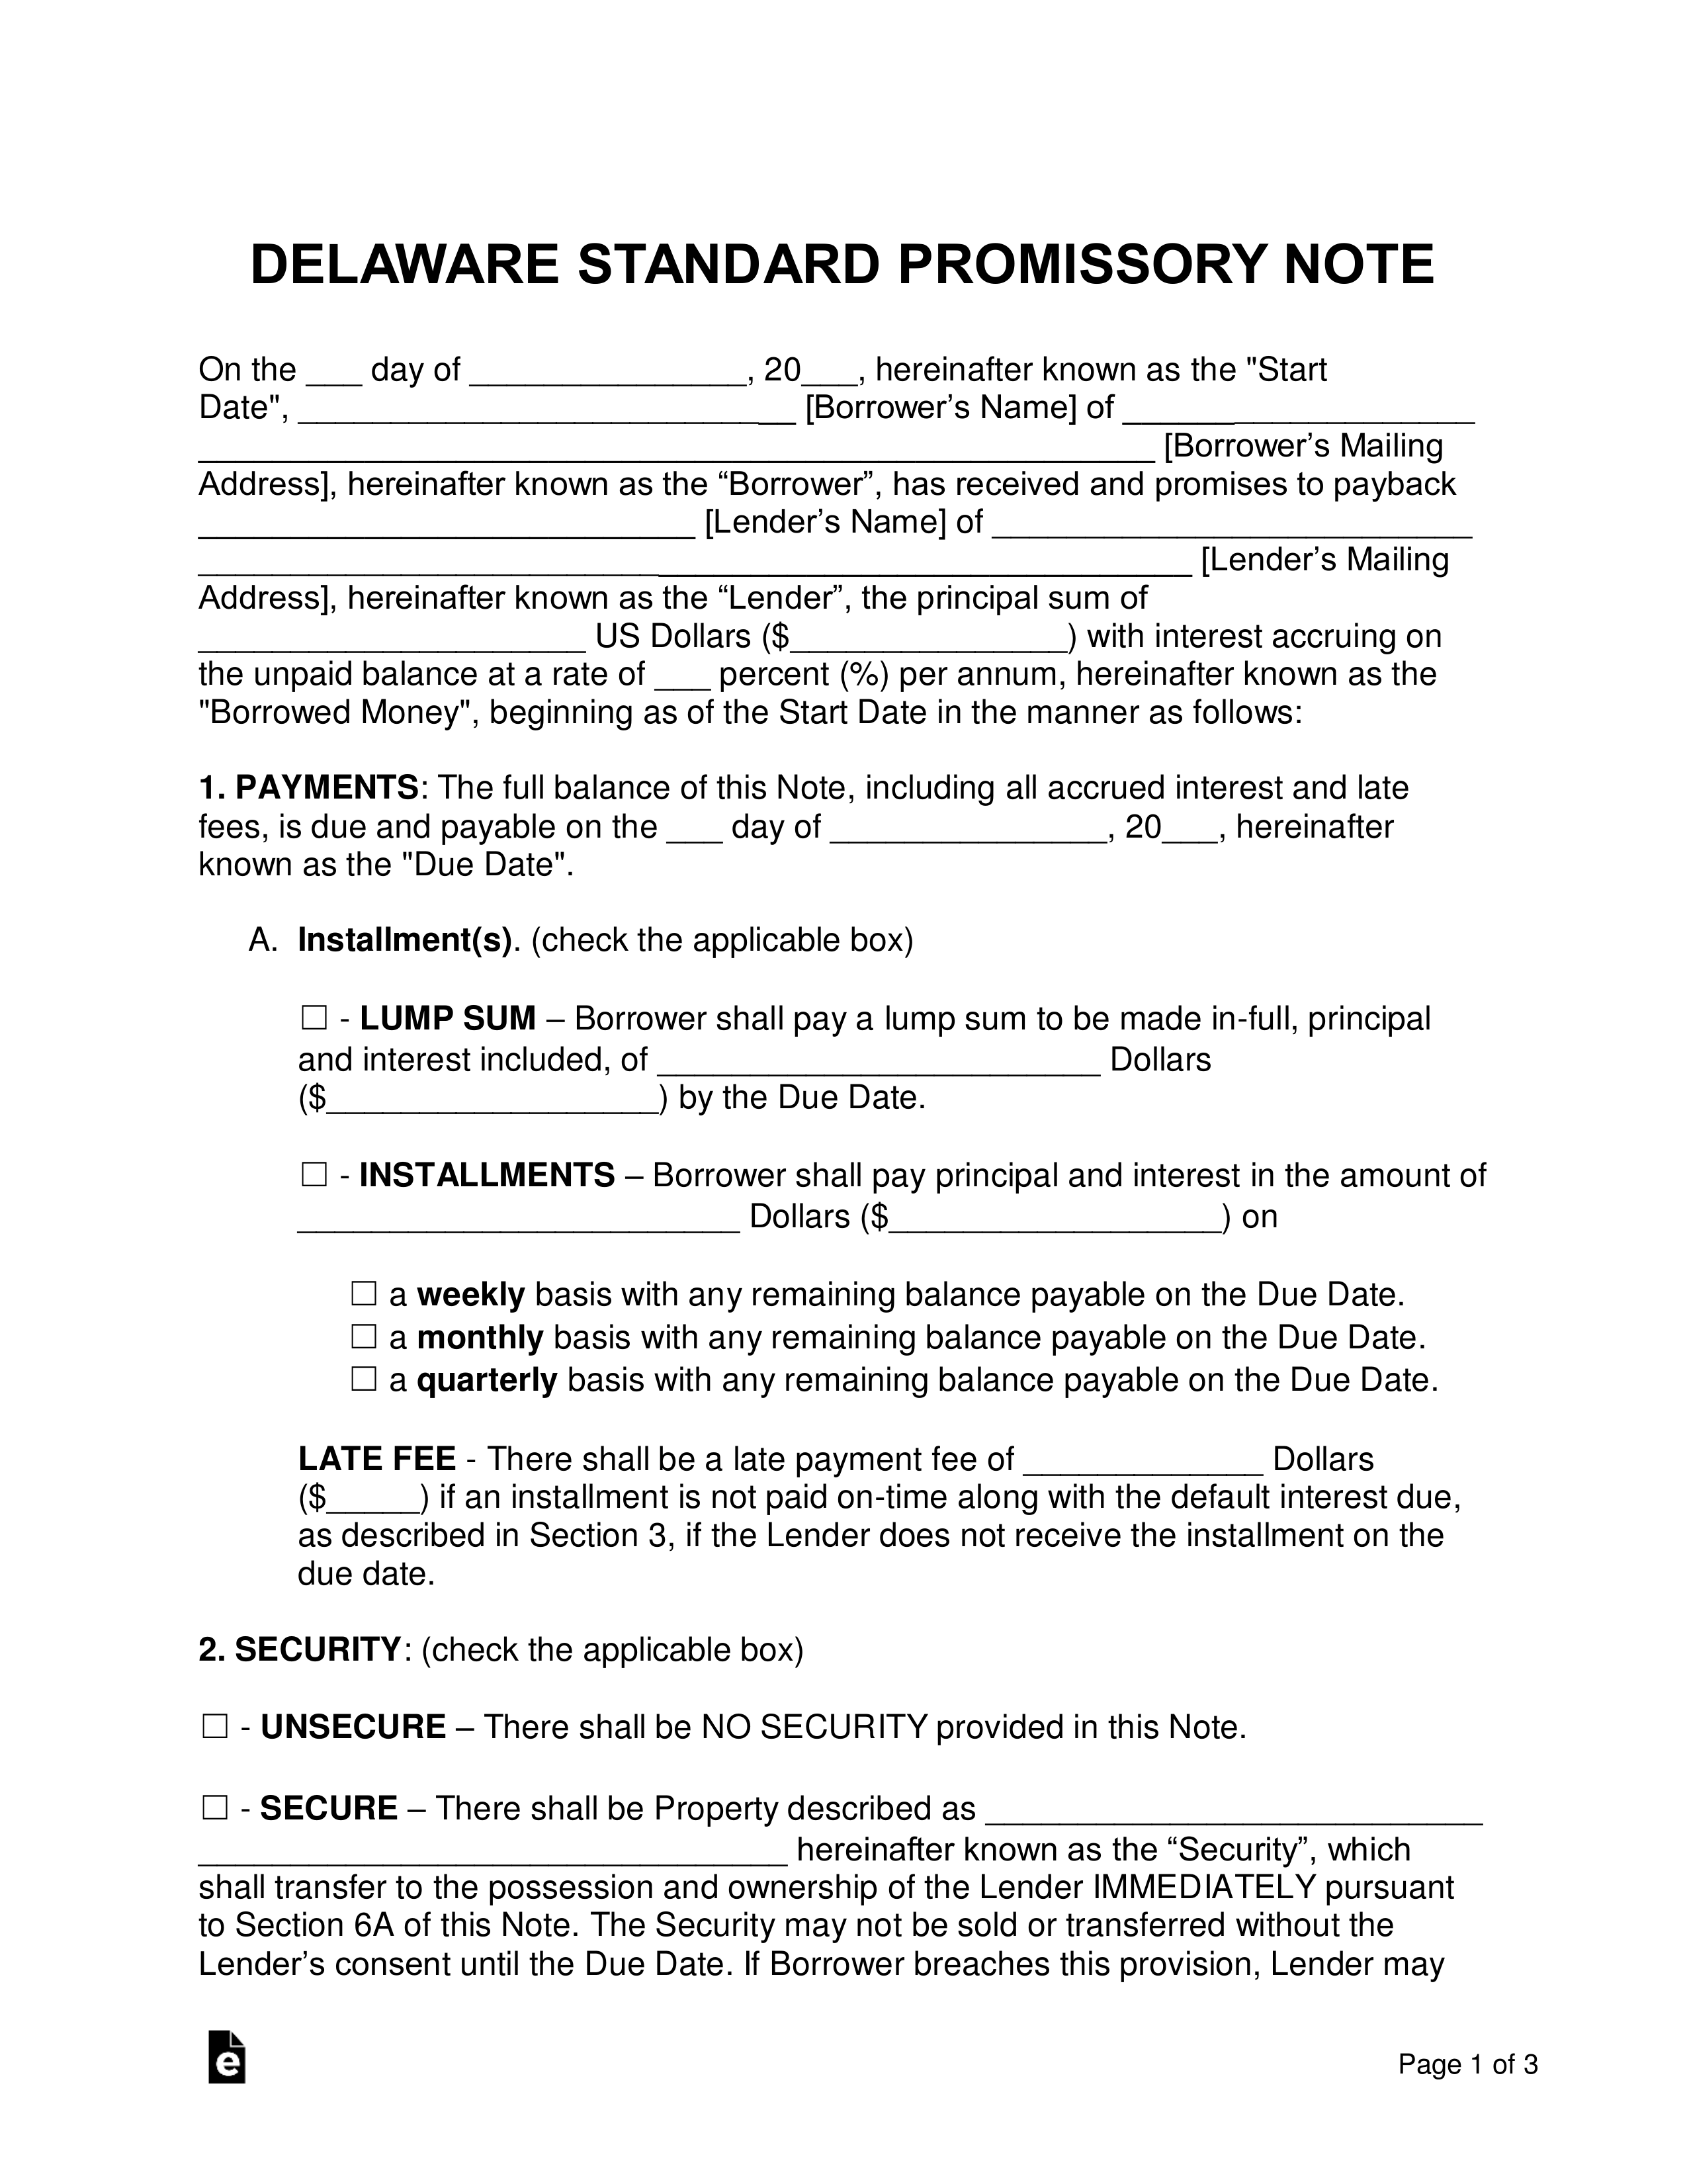 Delaware Promissory Note Templates (2)